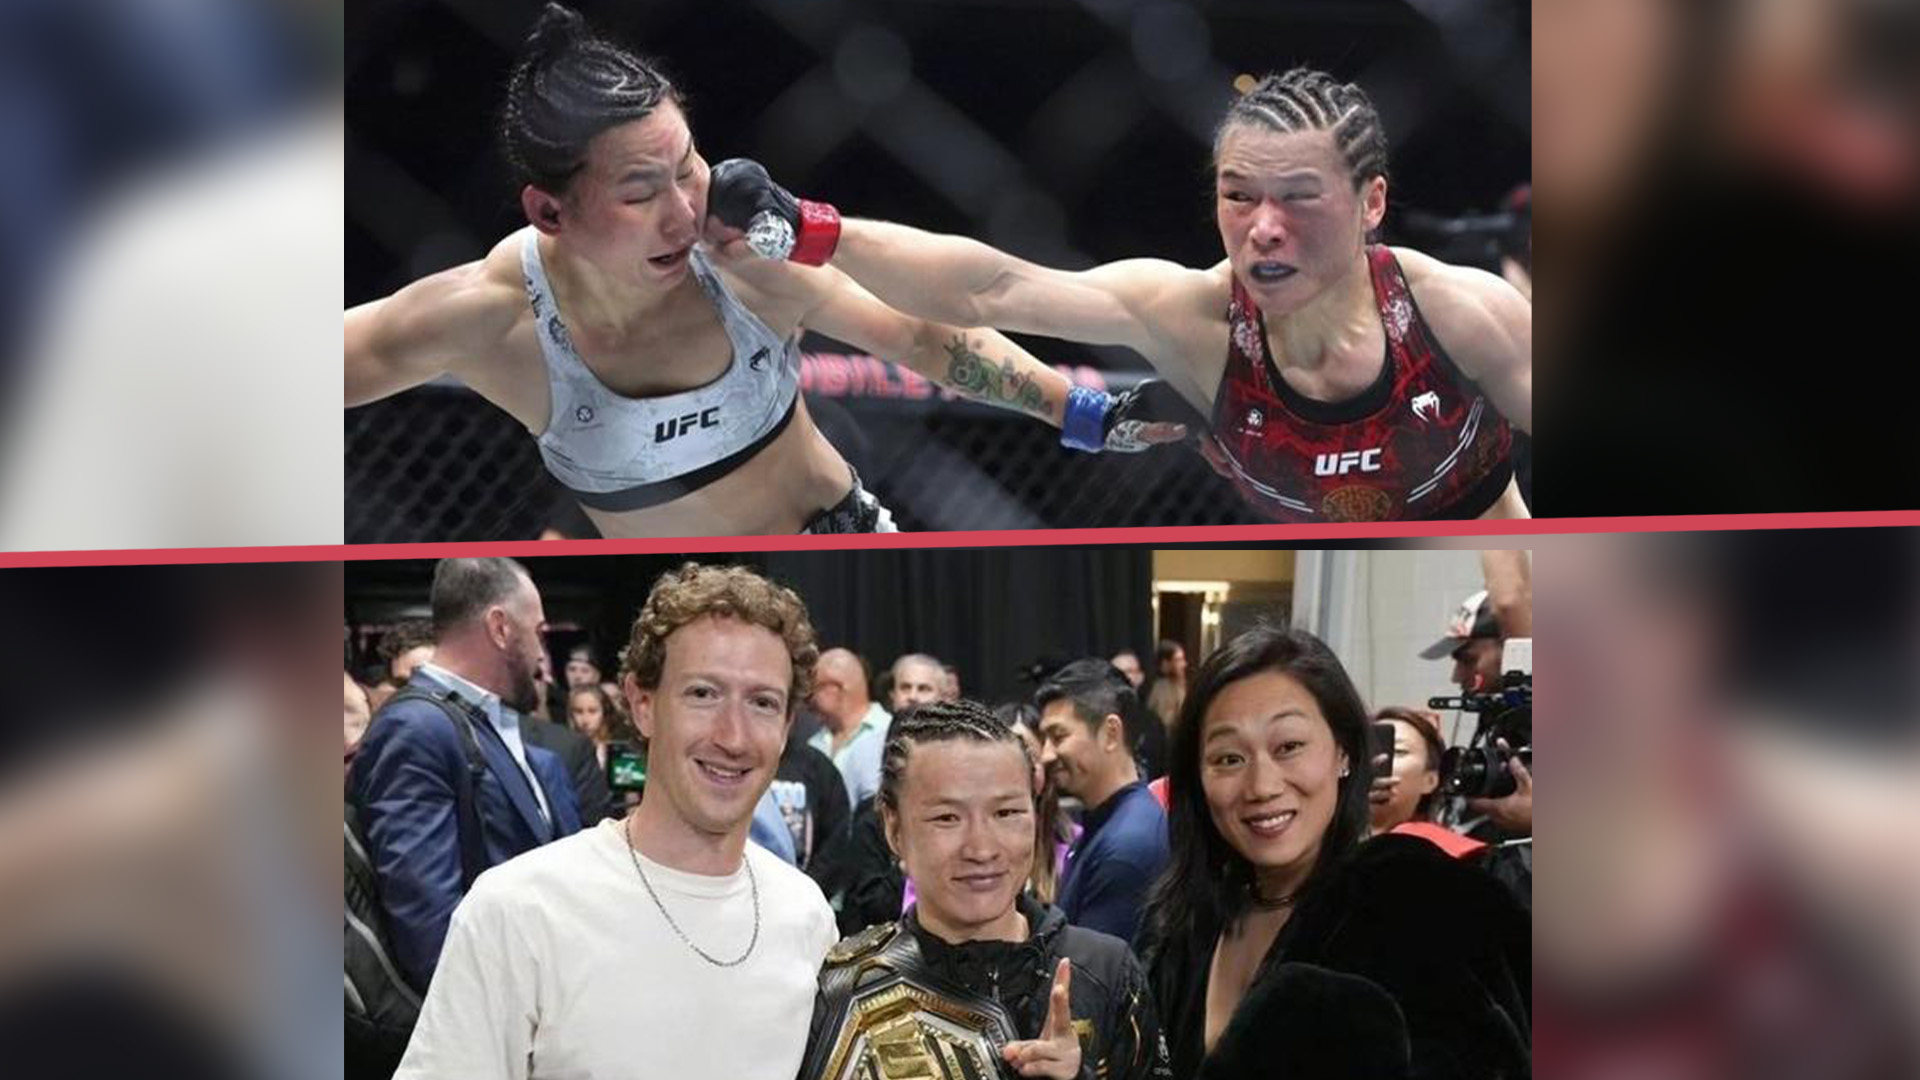 Zhang Weili, China’s first UFC champion and mixed martial arts icon lets nothing distract her before a fight, even her best known fans, Mark Zuckerberg and his wife Priscilla Chan. The Post profiles China’s champion. Photo: SCMP composite/Sina.com